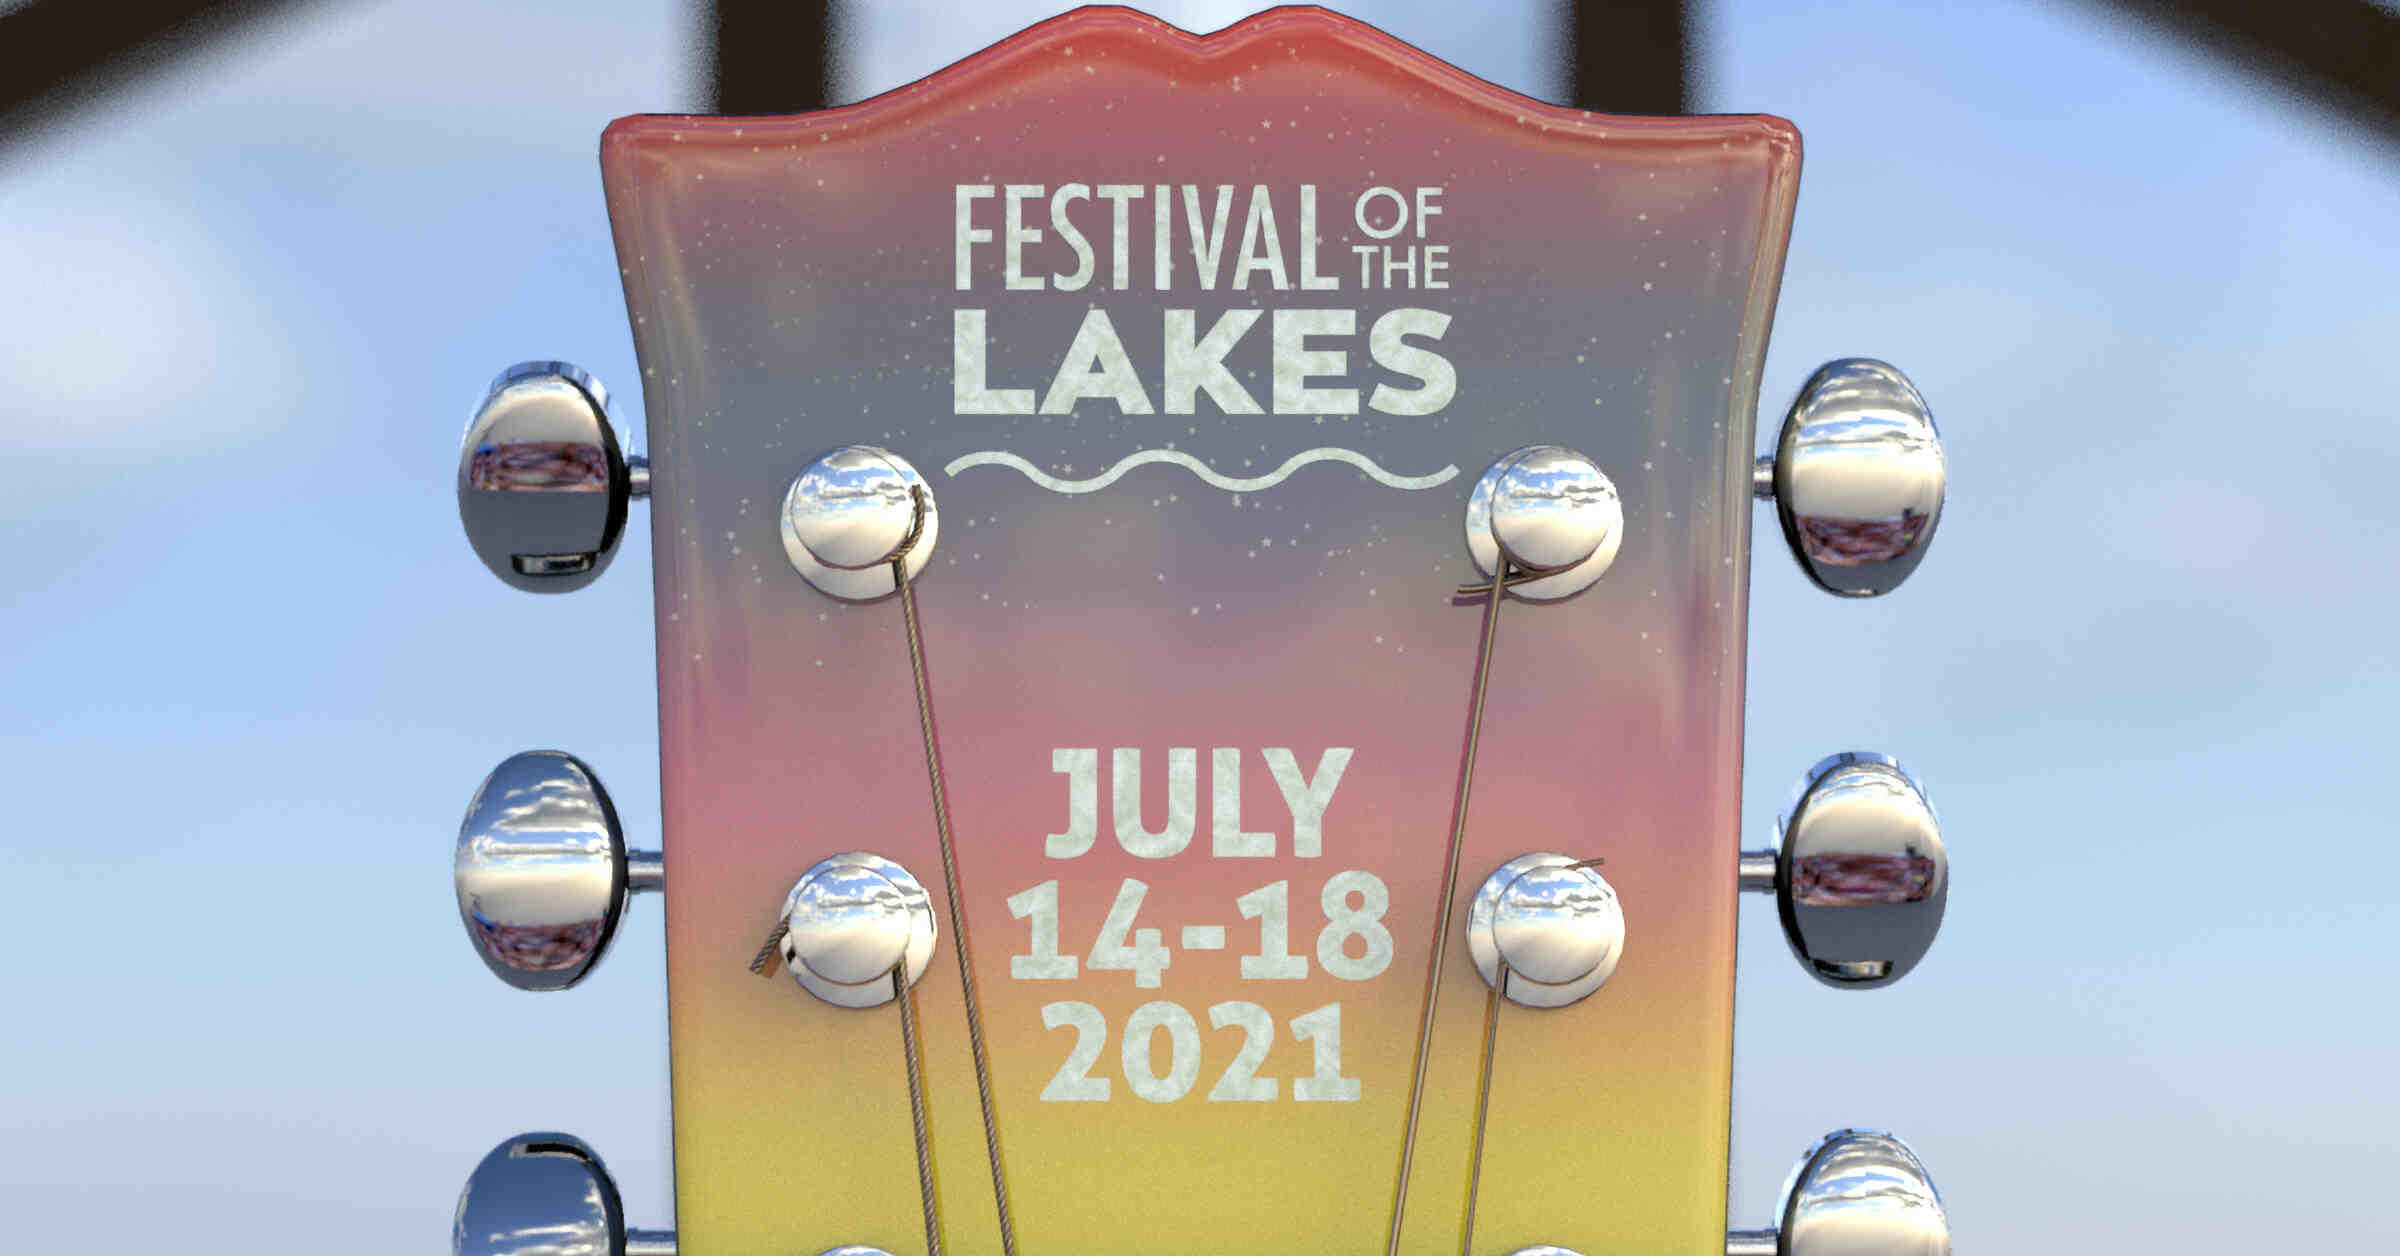 How long is the Festival of the Lakes?